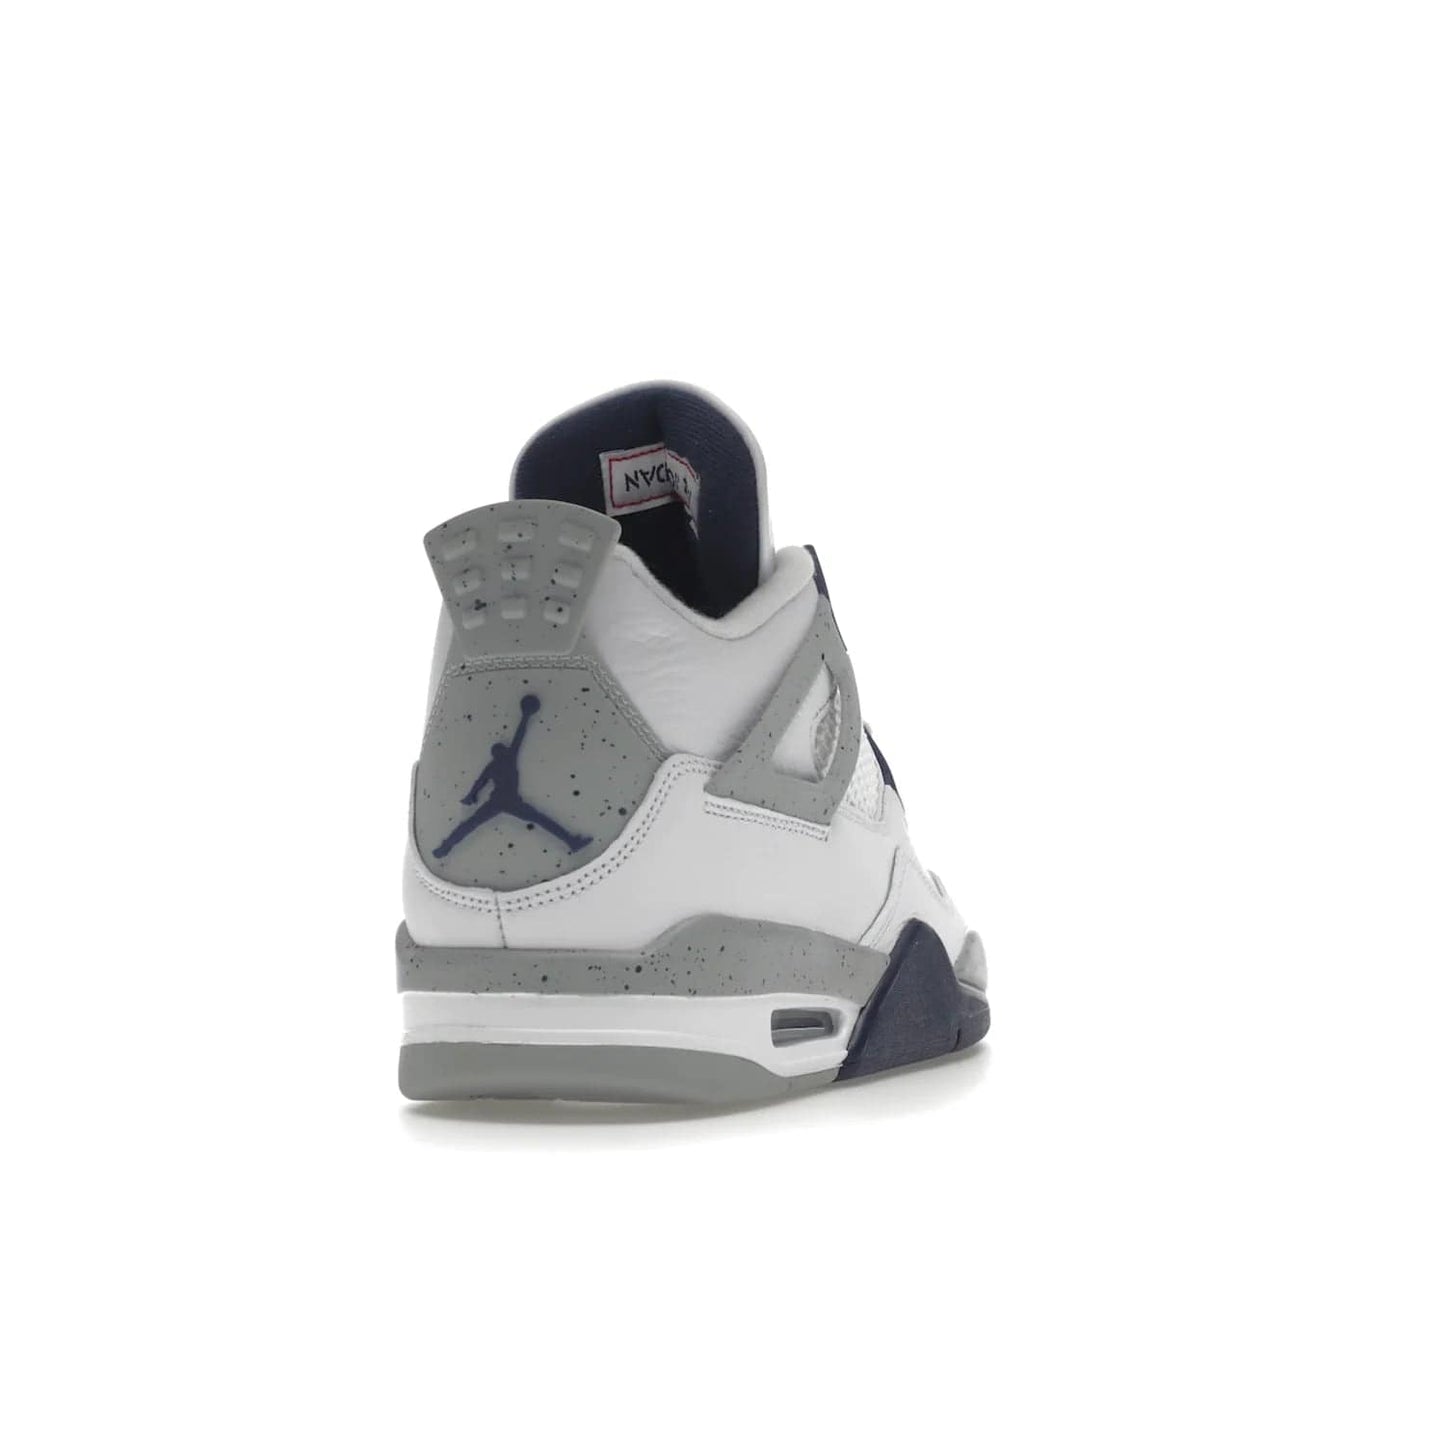 Jordan 4 Retro Midnight Navy - Image 30 - Only at www.BallersClubKickz.com - Shop the Air Jordan Retro 4 White Midnight Navy. Stand out with a classic white leather upper, black support wings, midnight navy eyelets, and Crimson Jumpman tongue tag. Unbeatable comfort with two-tone polyurethane midsole with encapsulated Air technology. Get yours before October 29th, 2022.